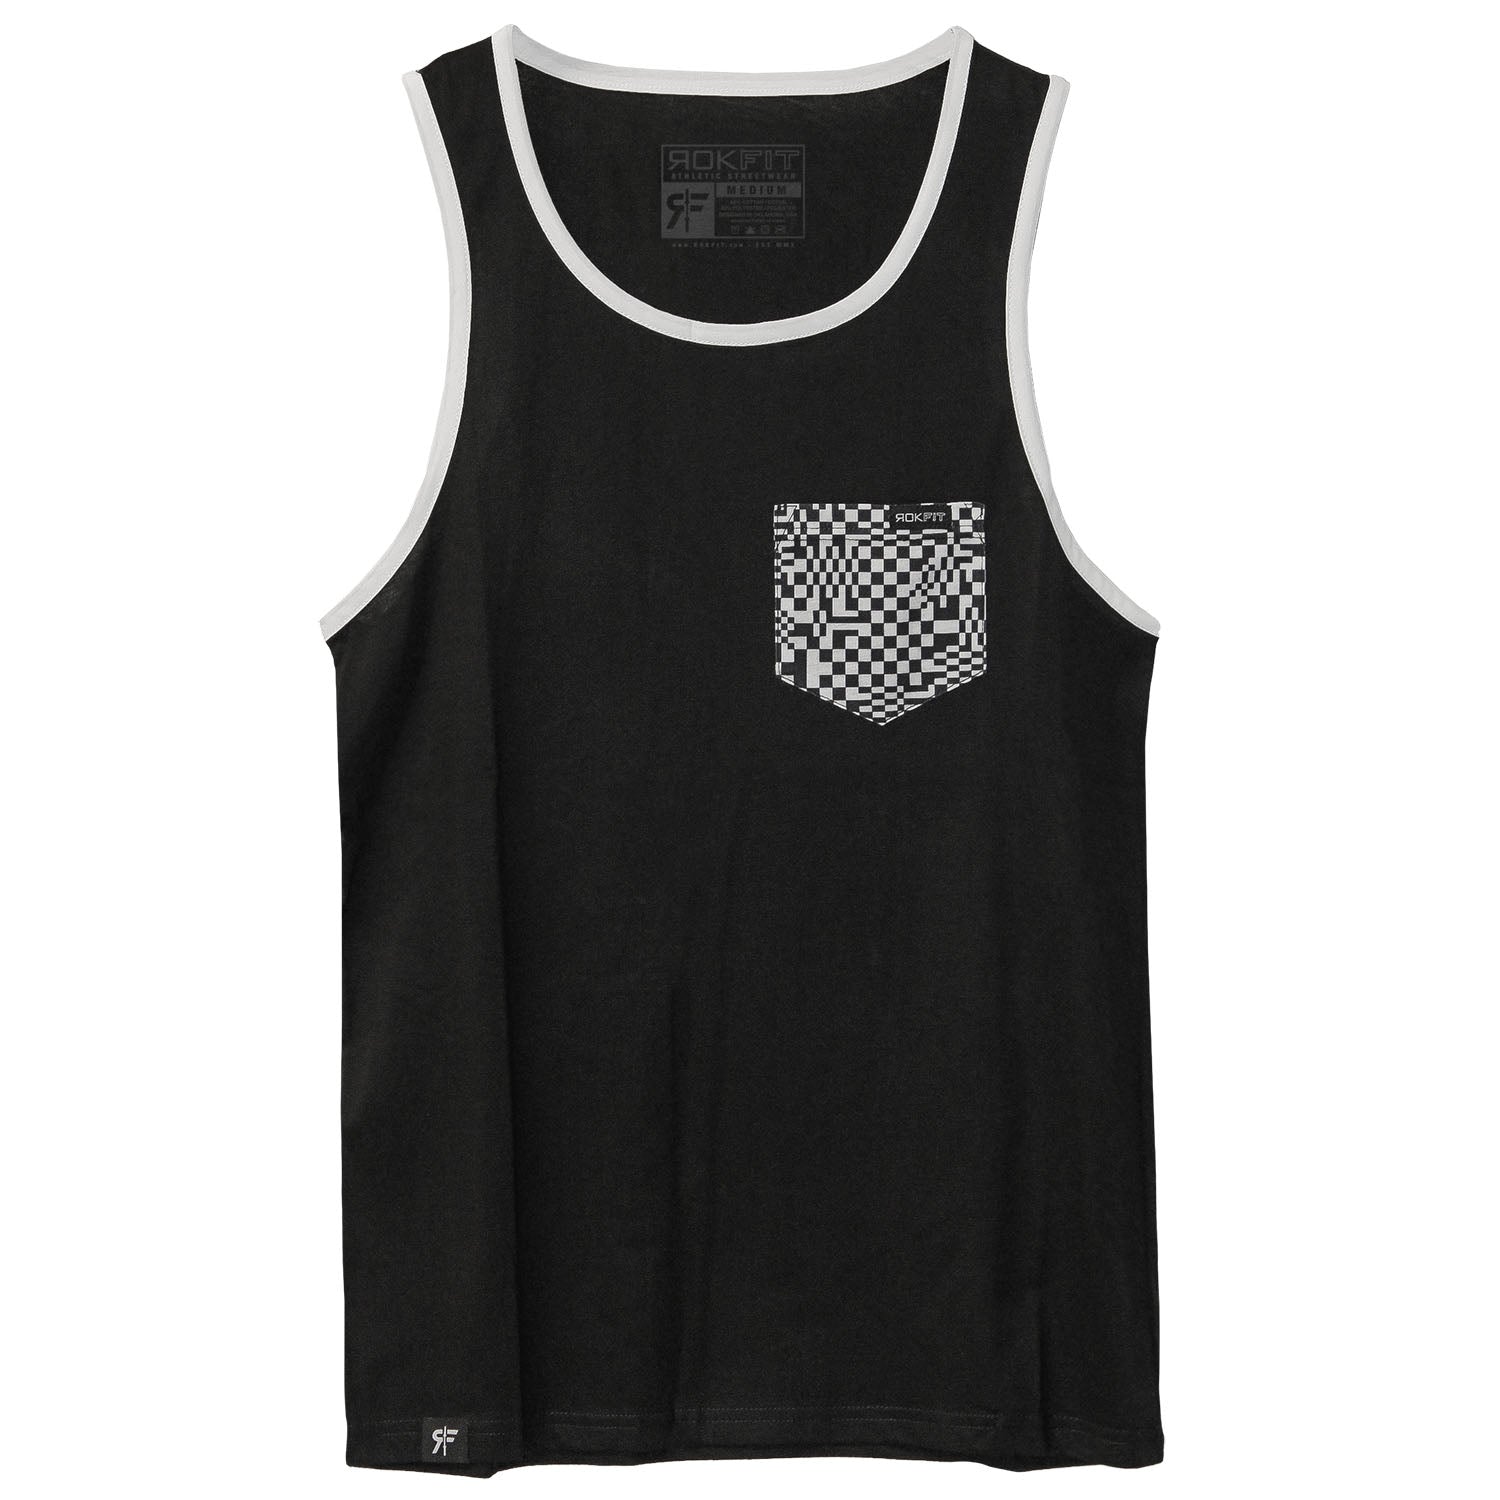 RokFit 'Check Your Head' - Tank Top